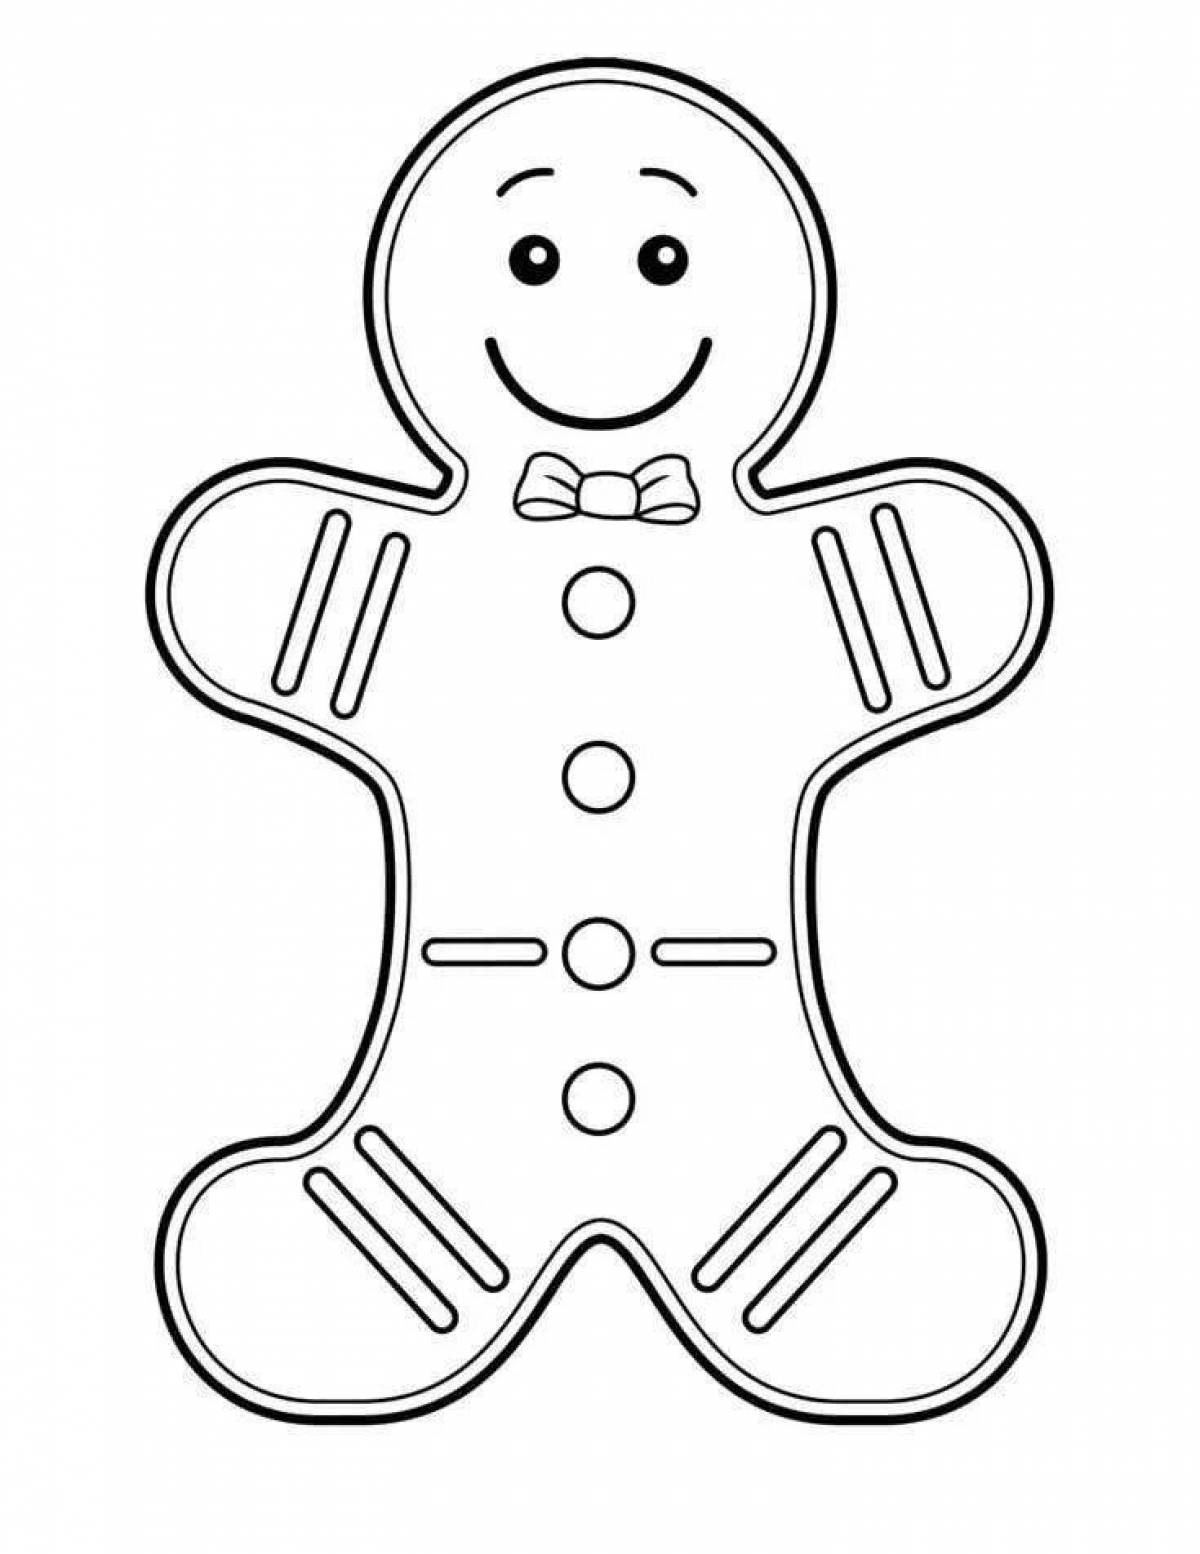 Invitation of gingerbread to Christmas coloring book